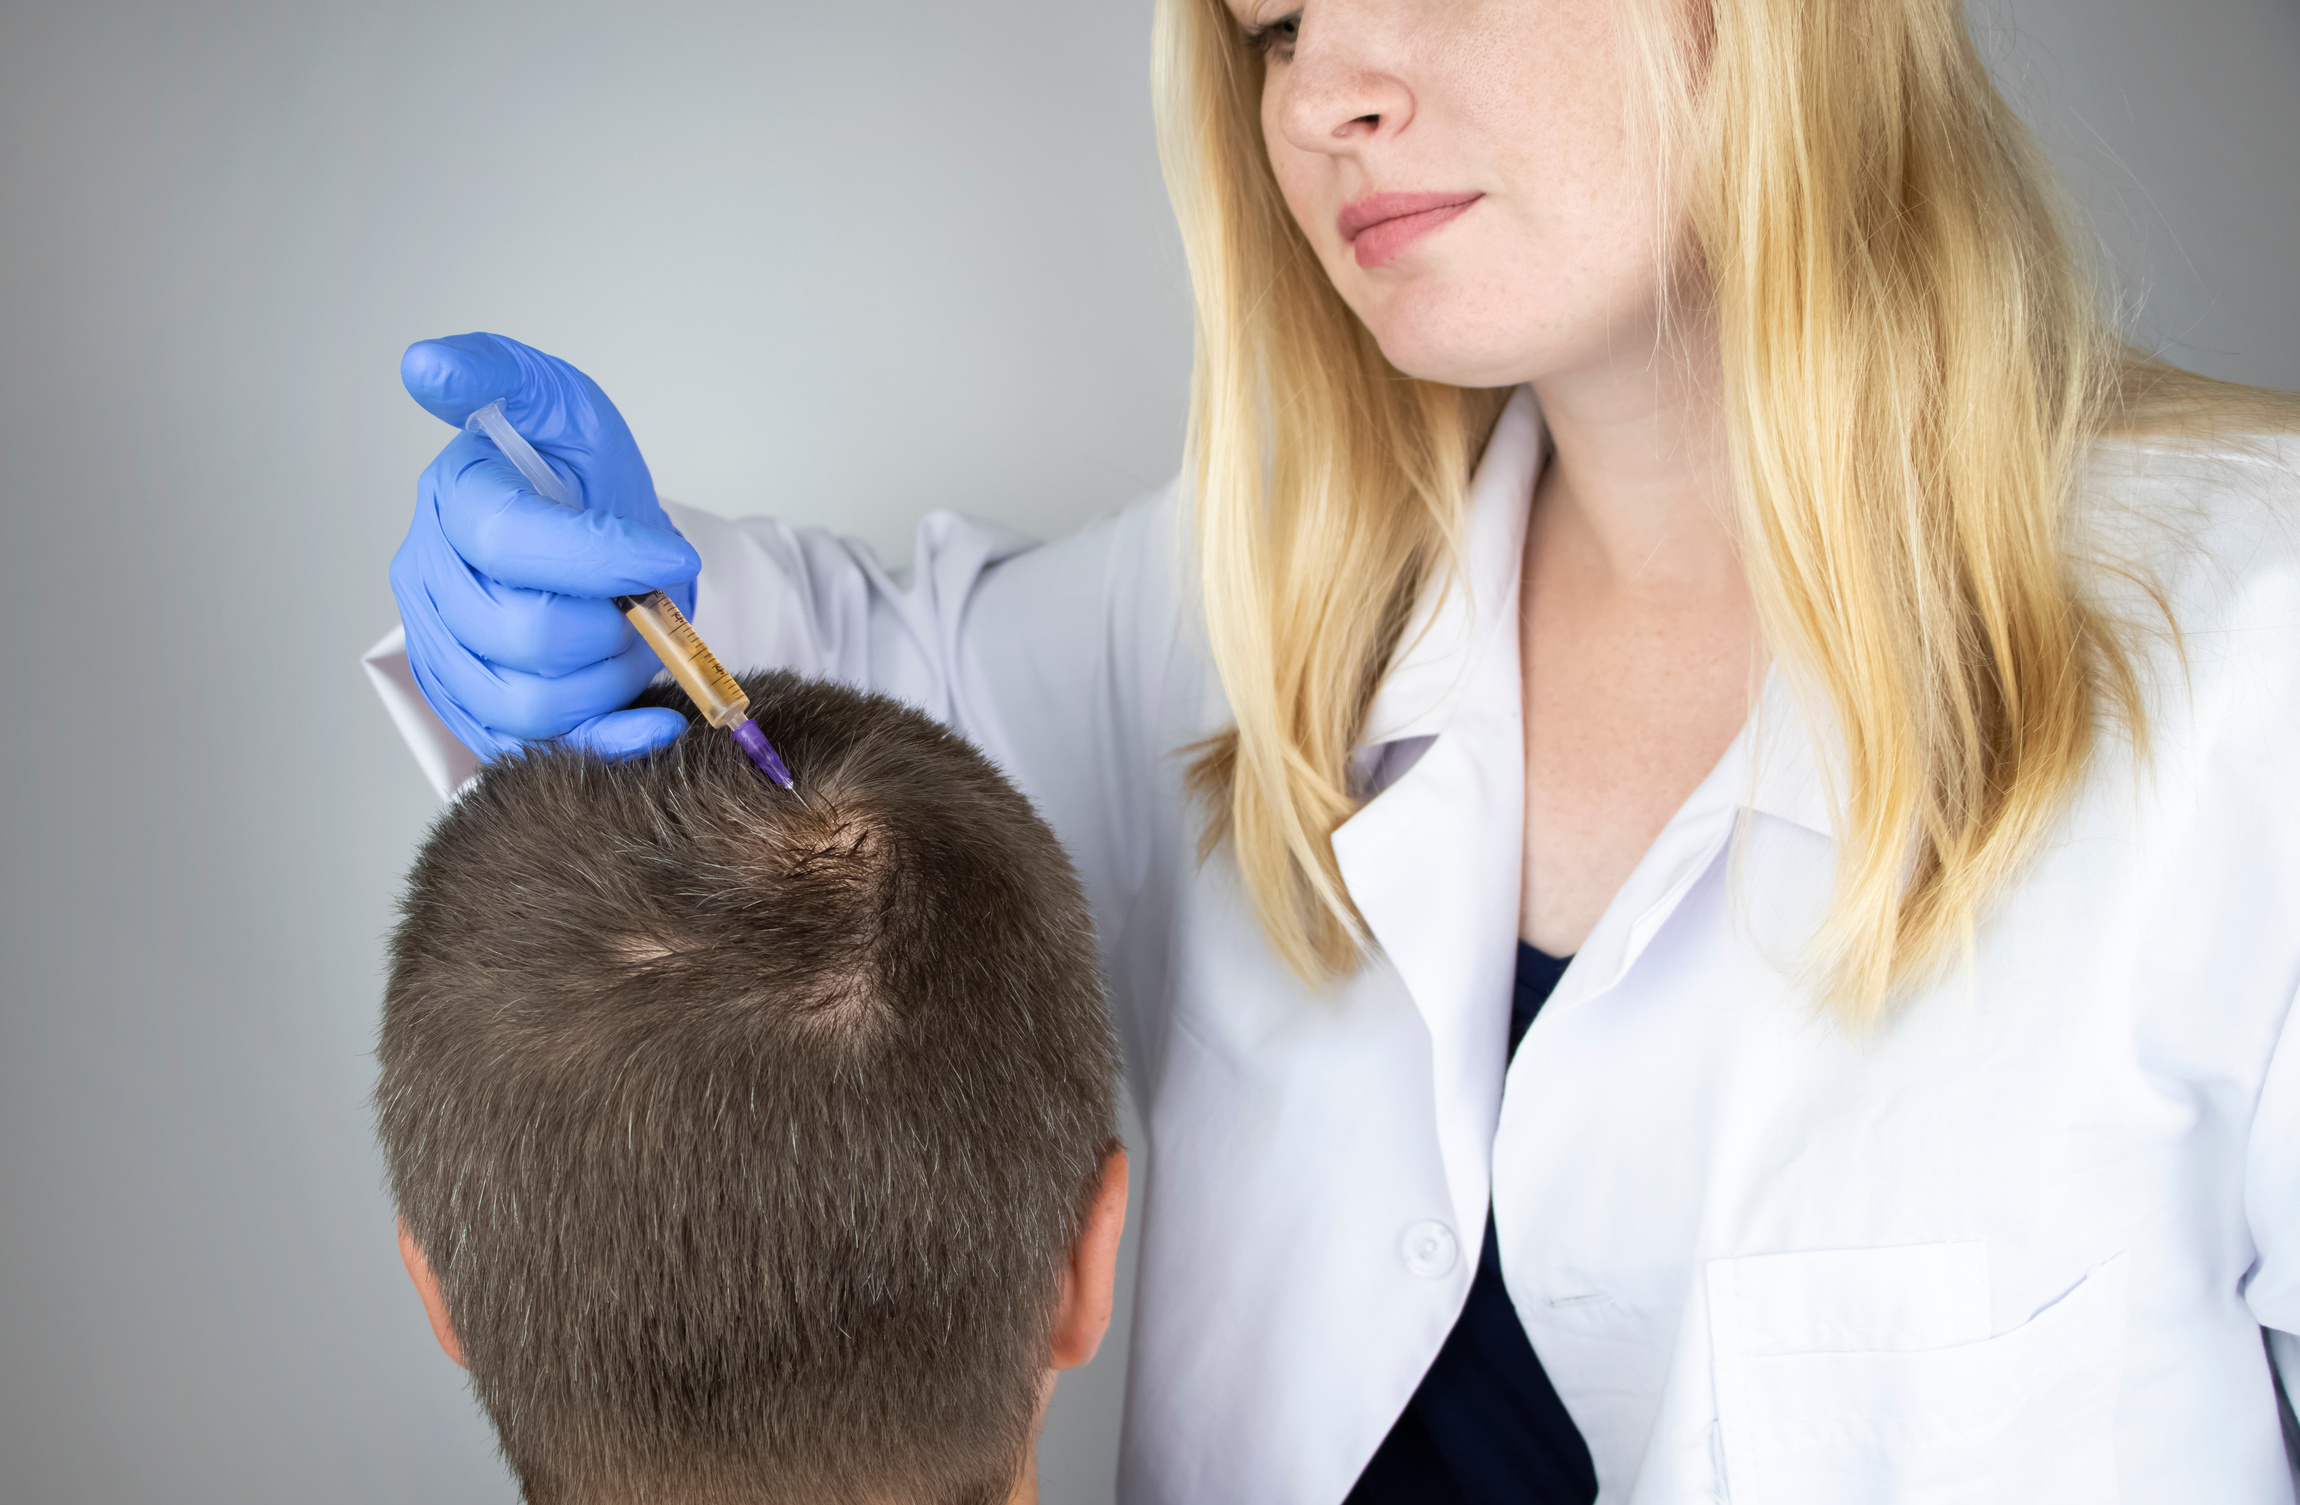 Trichologist Examining Scalp of Patient with Alopecia